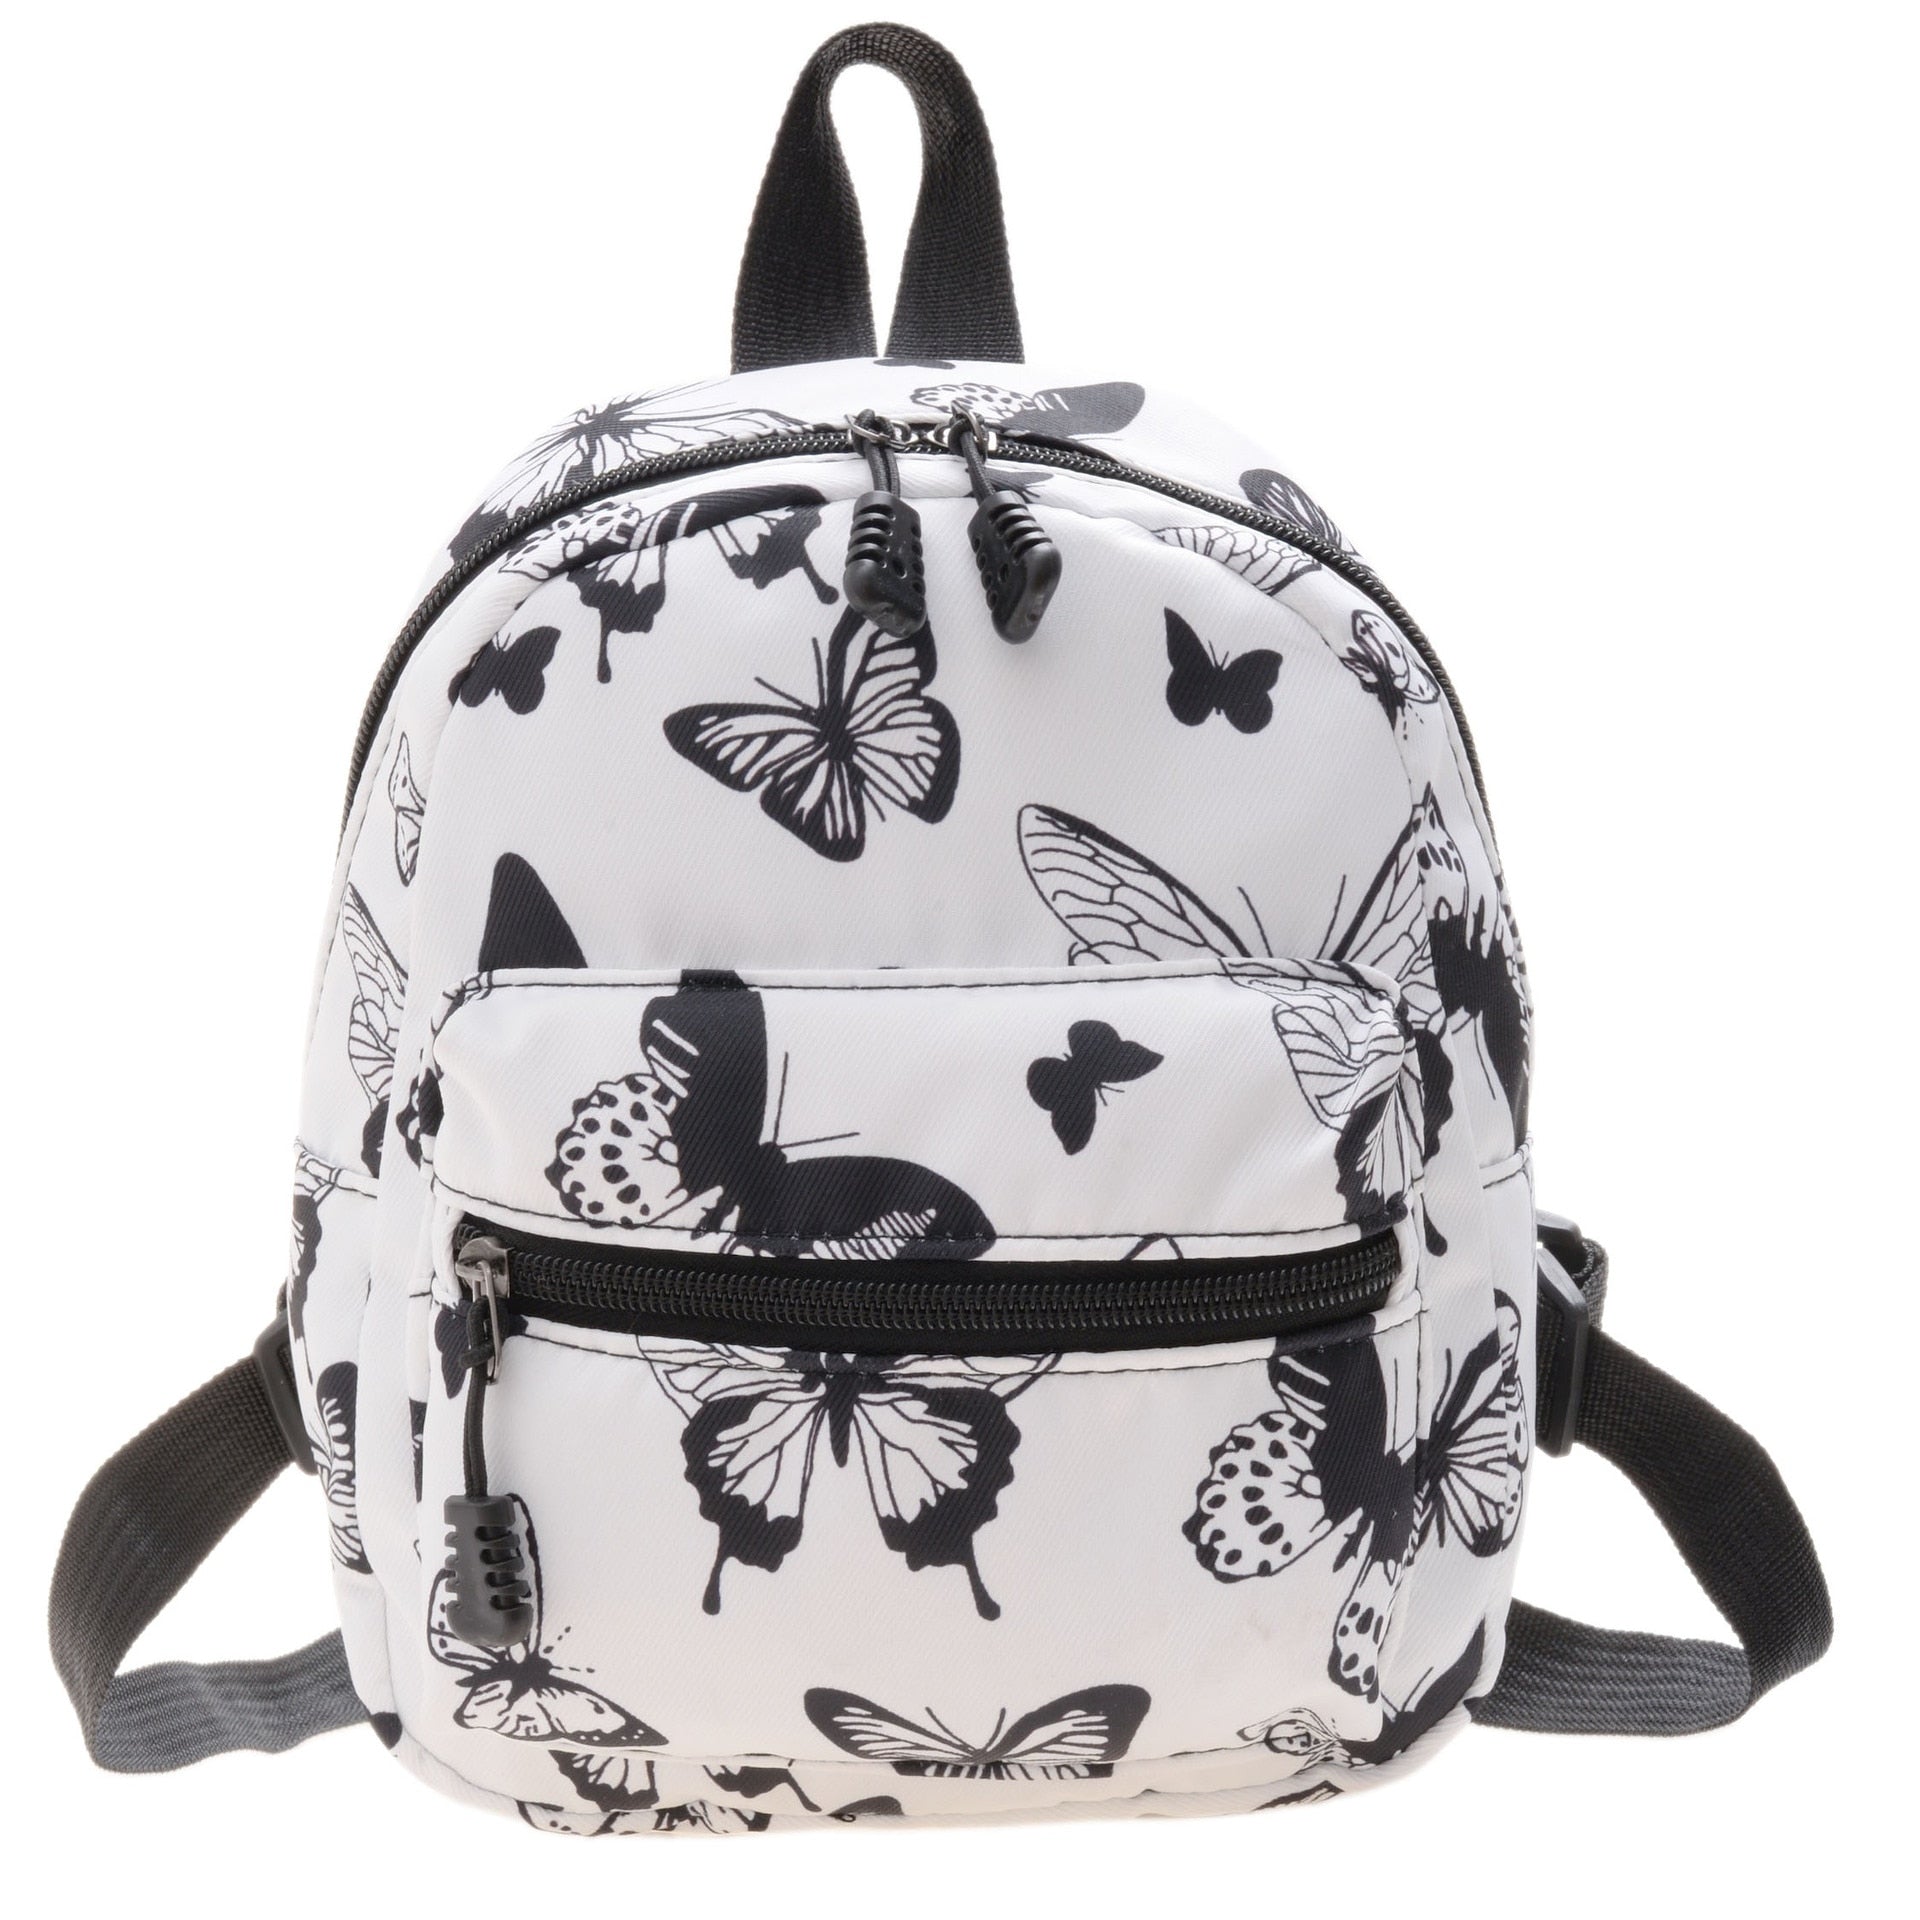 Y2K Aesthetic Mini Backpack Black and White Butterfly – Aesthetics